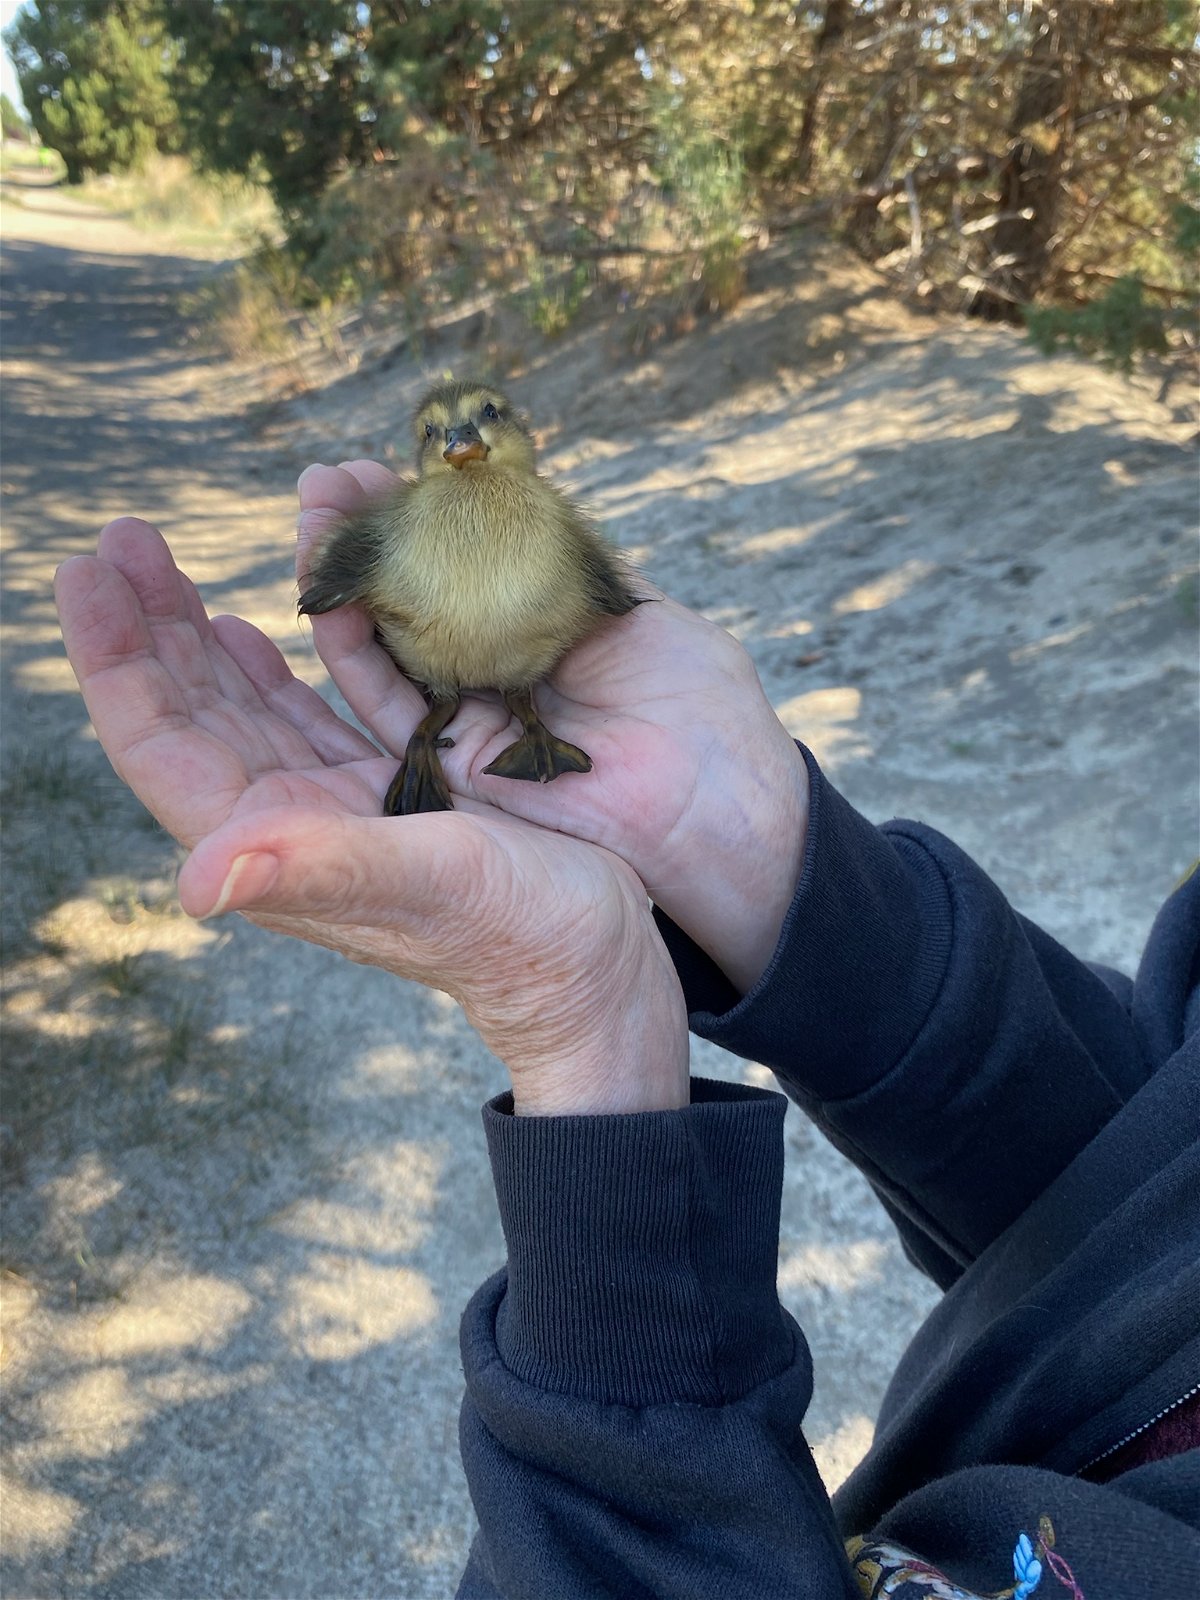 A save that’s all it’s quacked up to be: Bend family and neighbors come together to rescue 10 baby ducks